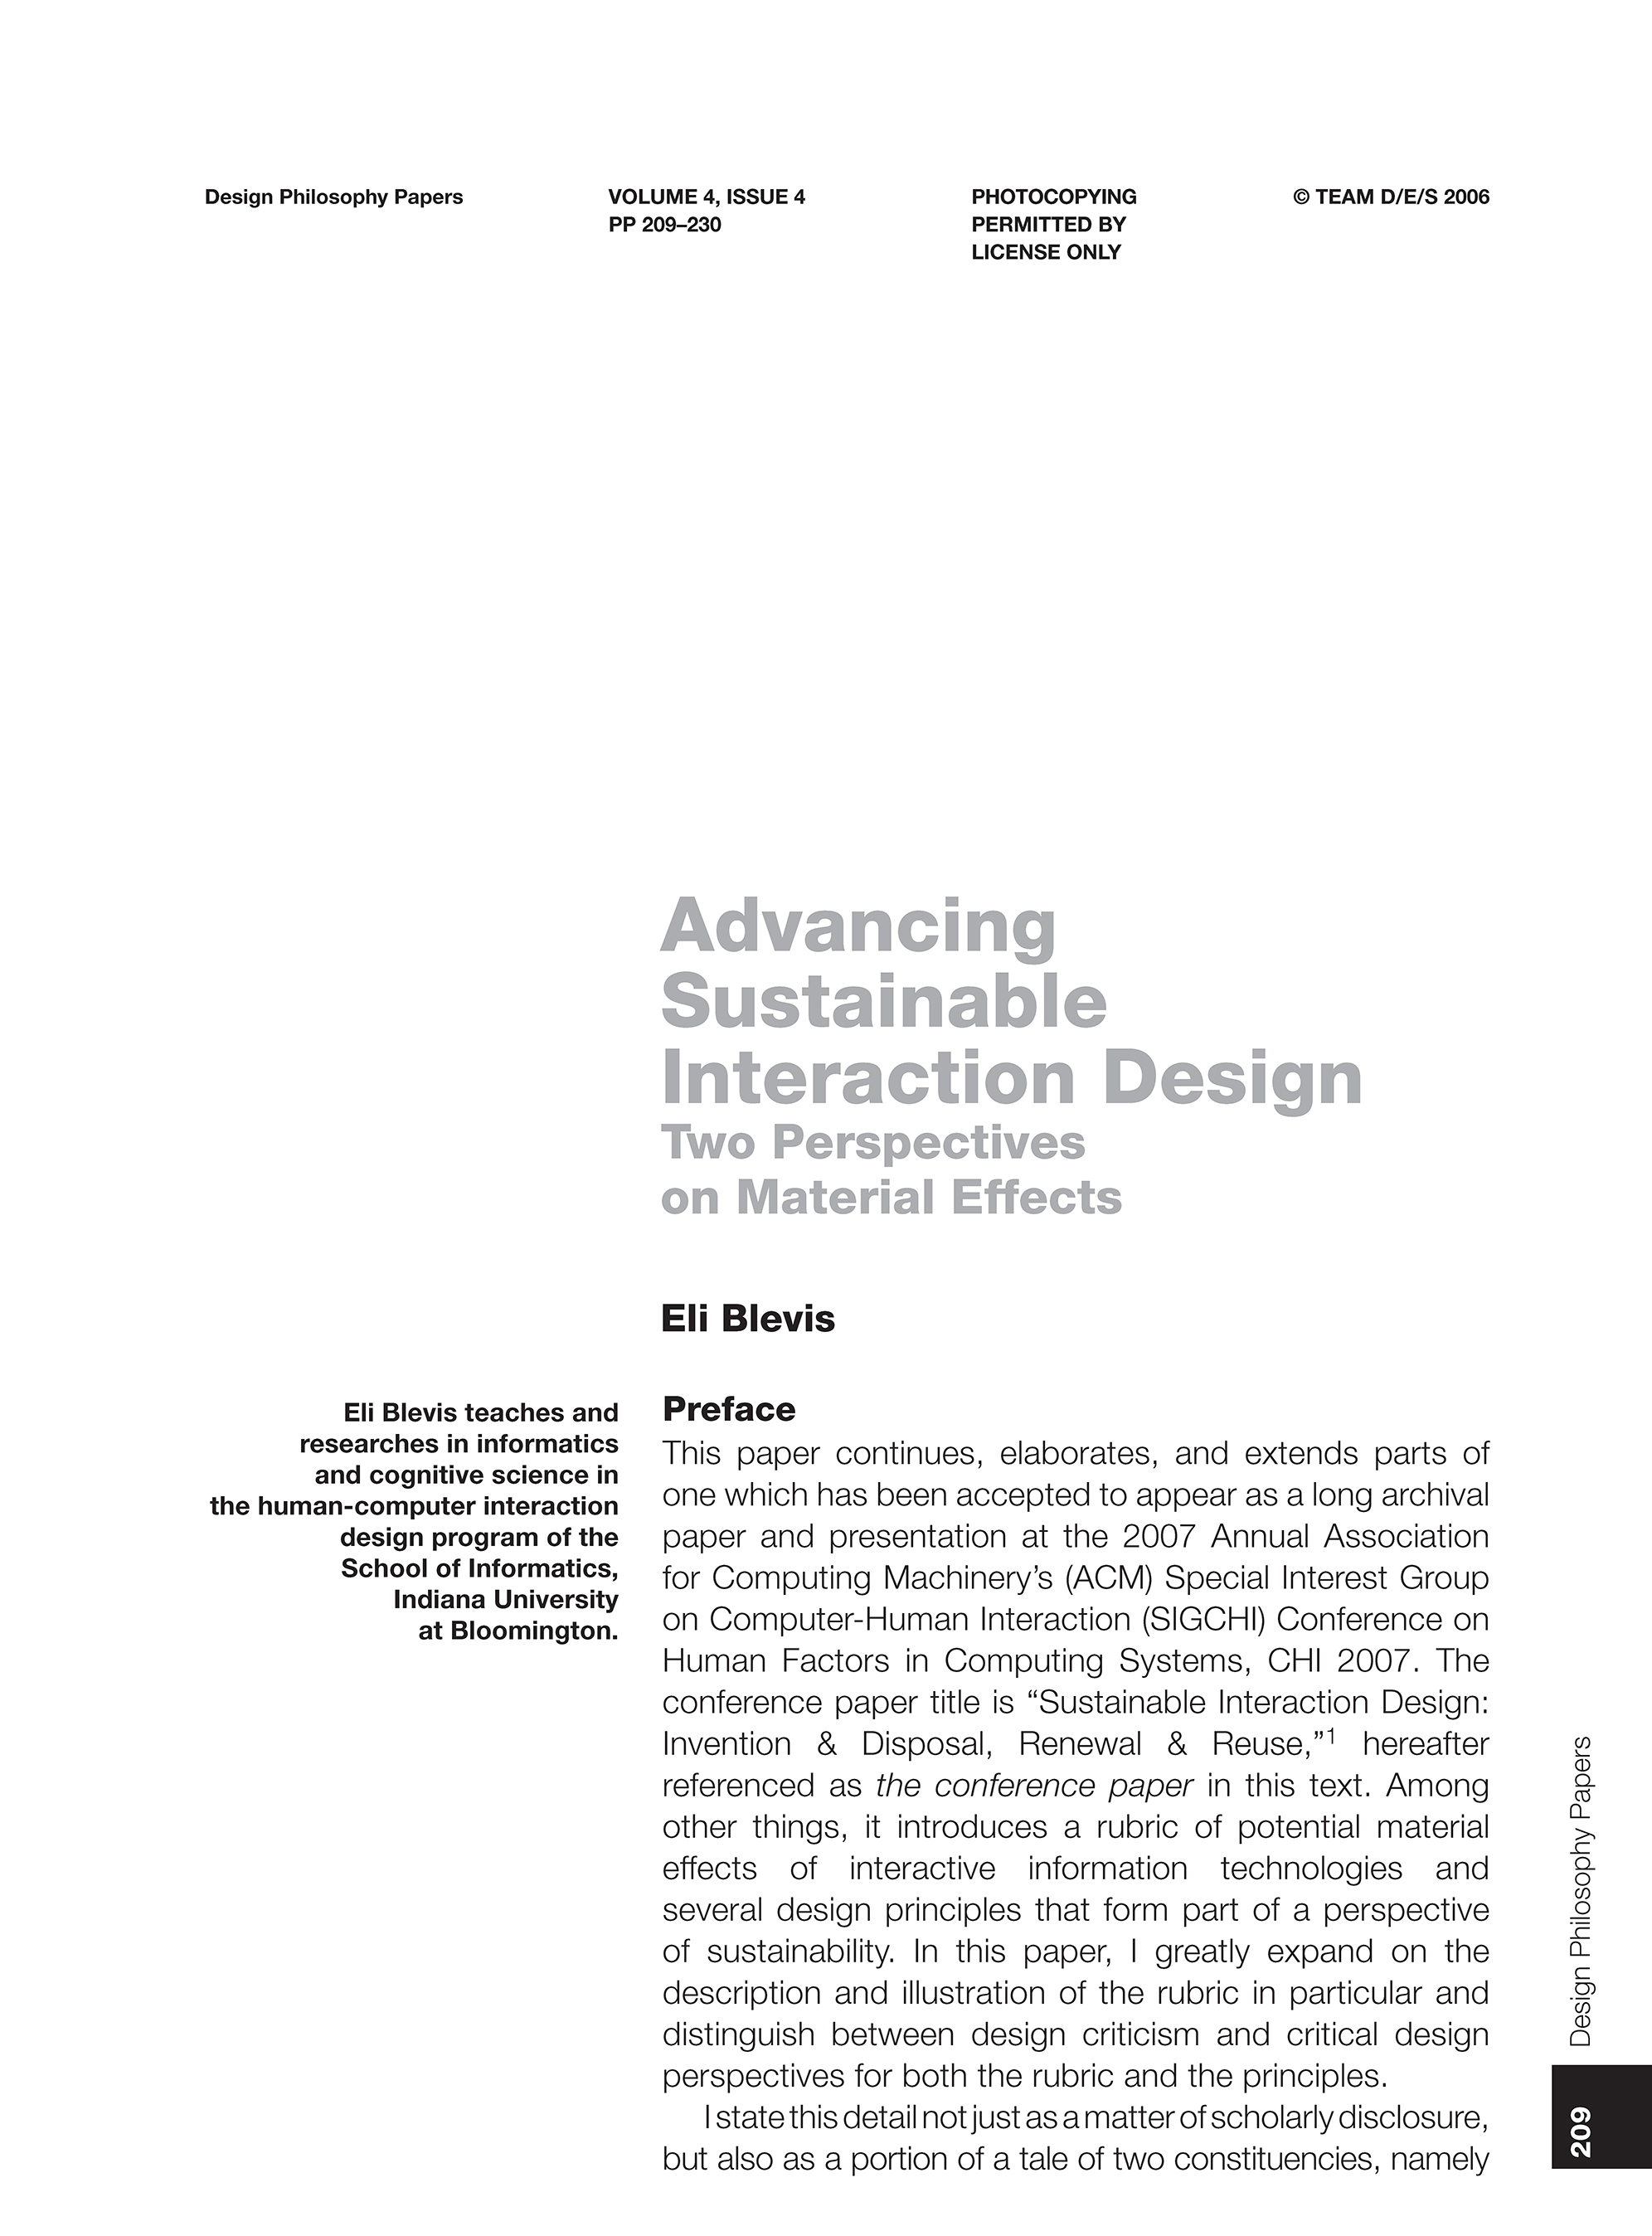 Advancing Sustainable Interaction Design: Two Perspectives on Material Effects